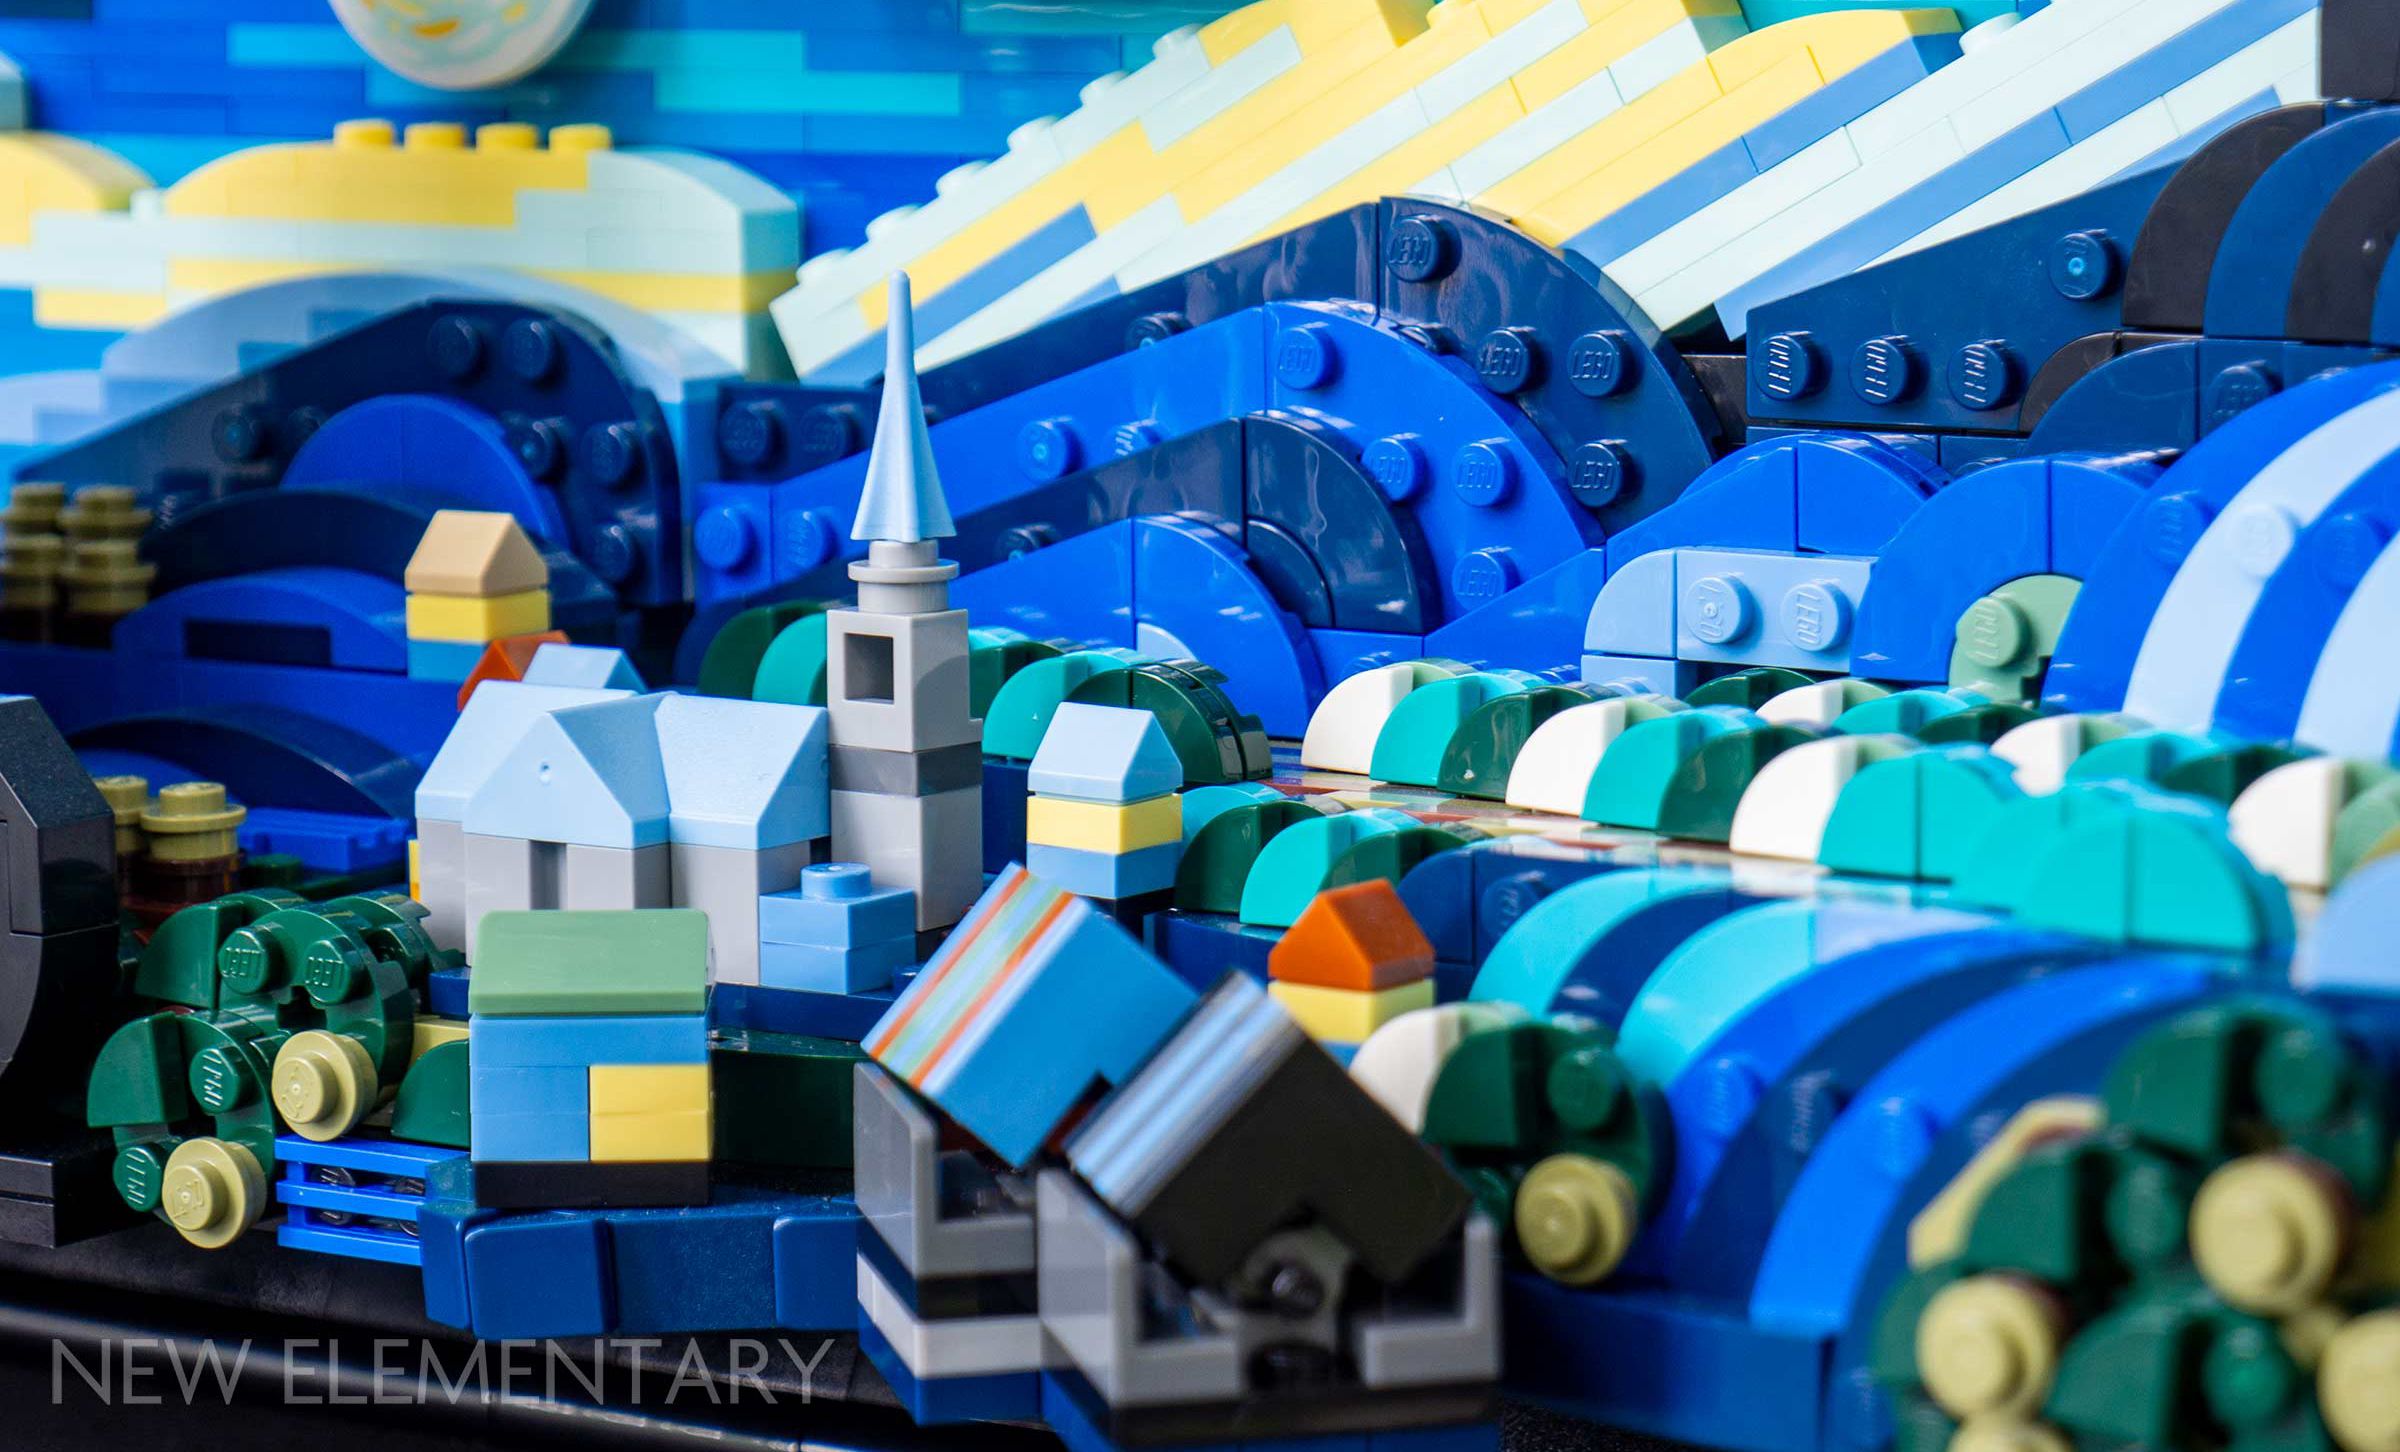 LEGO® Ideas review + MOC: 21333 Vincent van Gogh - The Starry Night